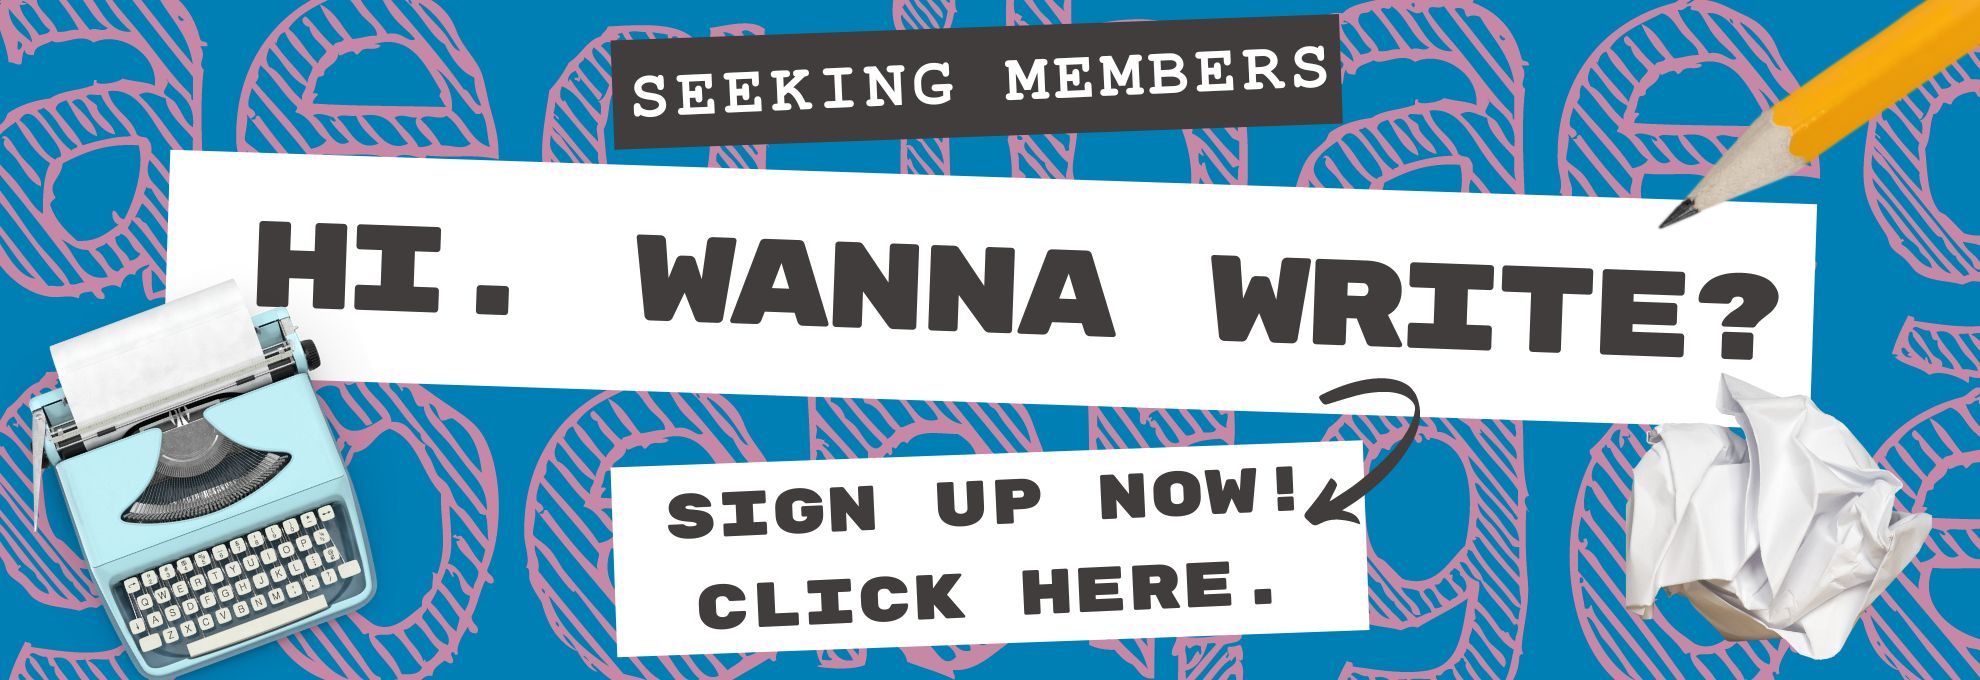 Sign up to our club now!